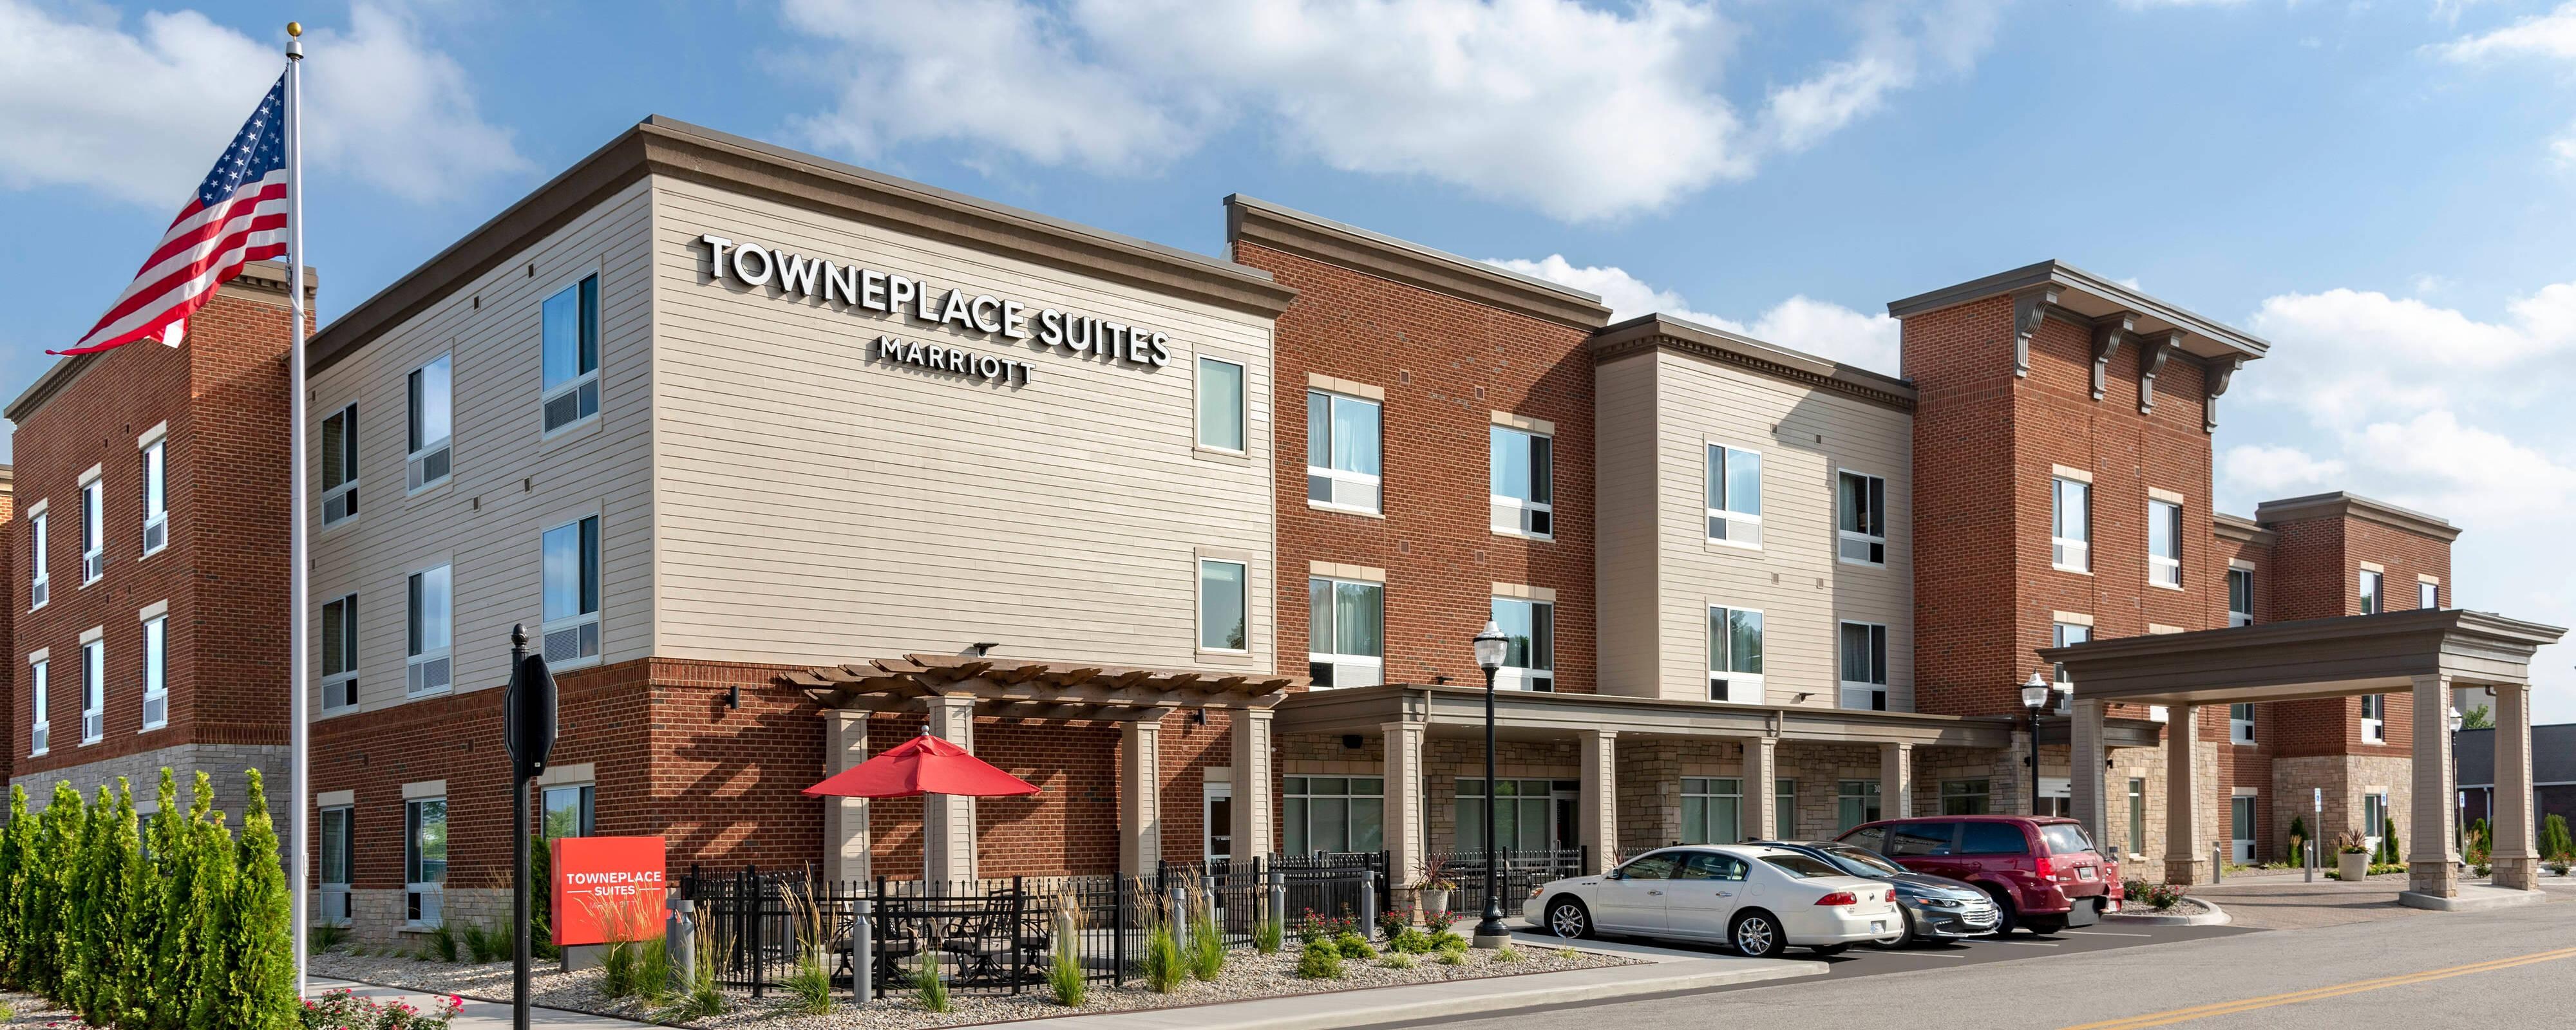 Hotels Jeffersonville  Indiana TownePlace Suites Louisville North